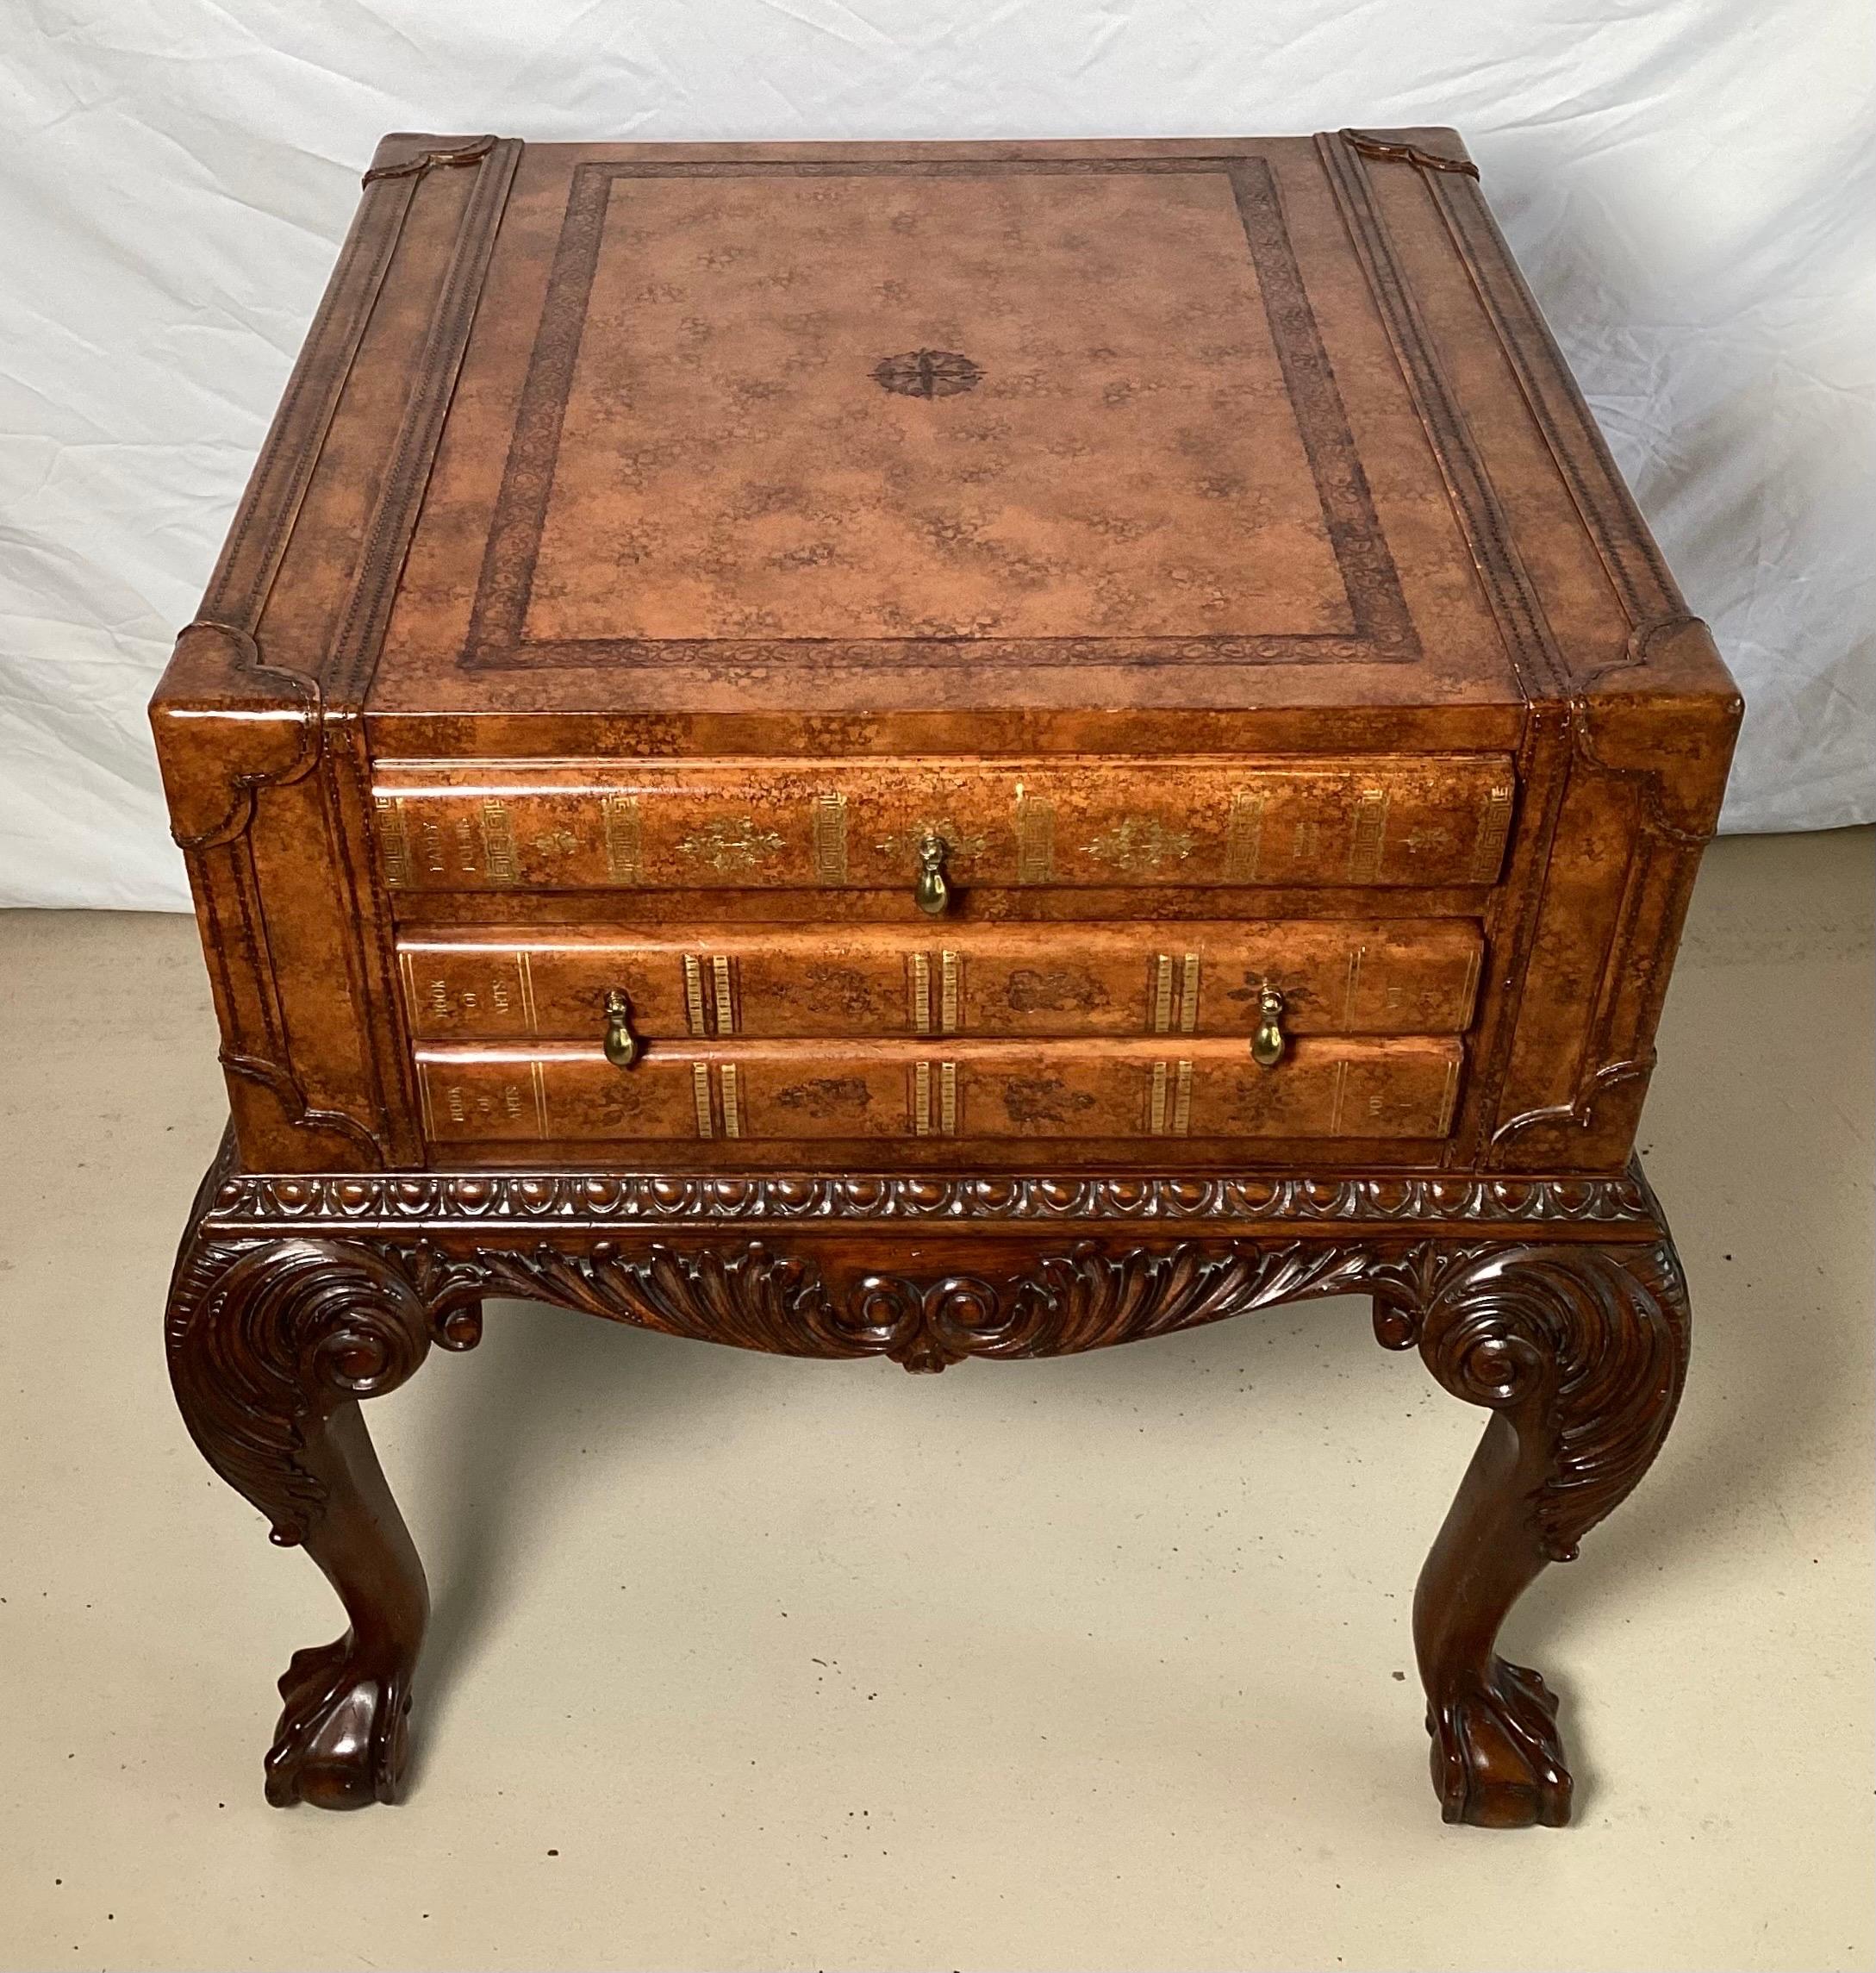 Beautiful carved mahogany and leather functional game table by Maitland Smith. The leather top, with drawers that wpull out for game boards with a Georgian style carved base.